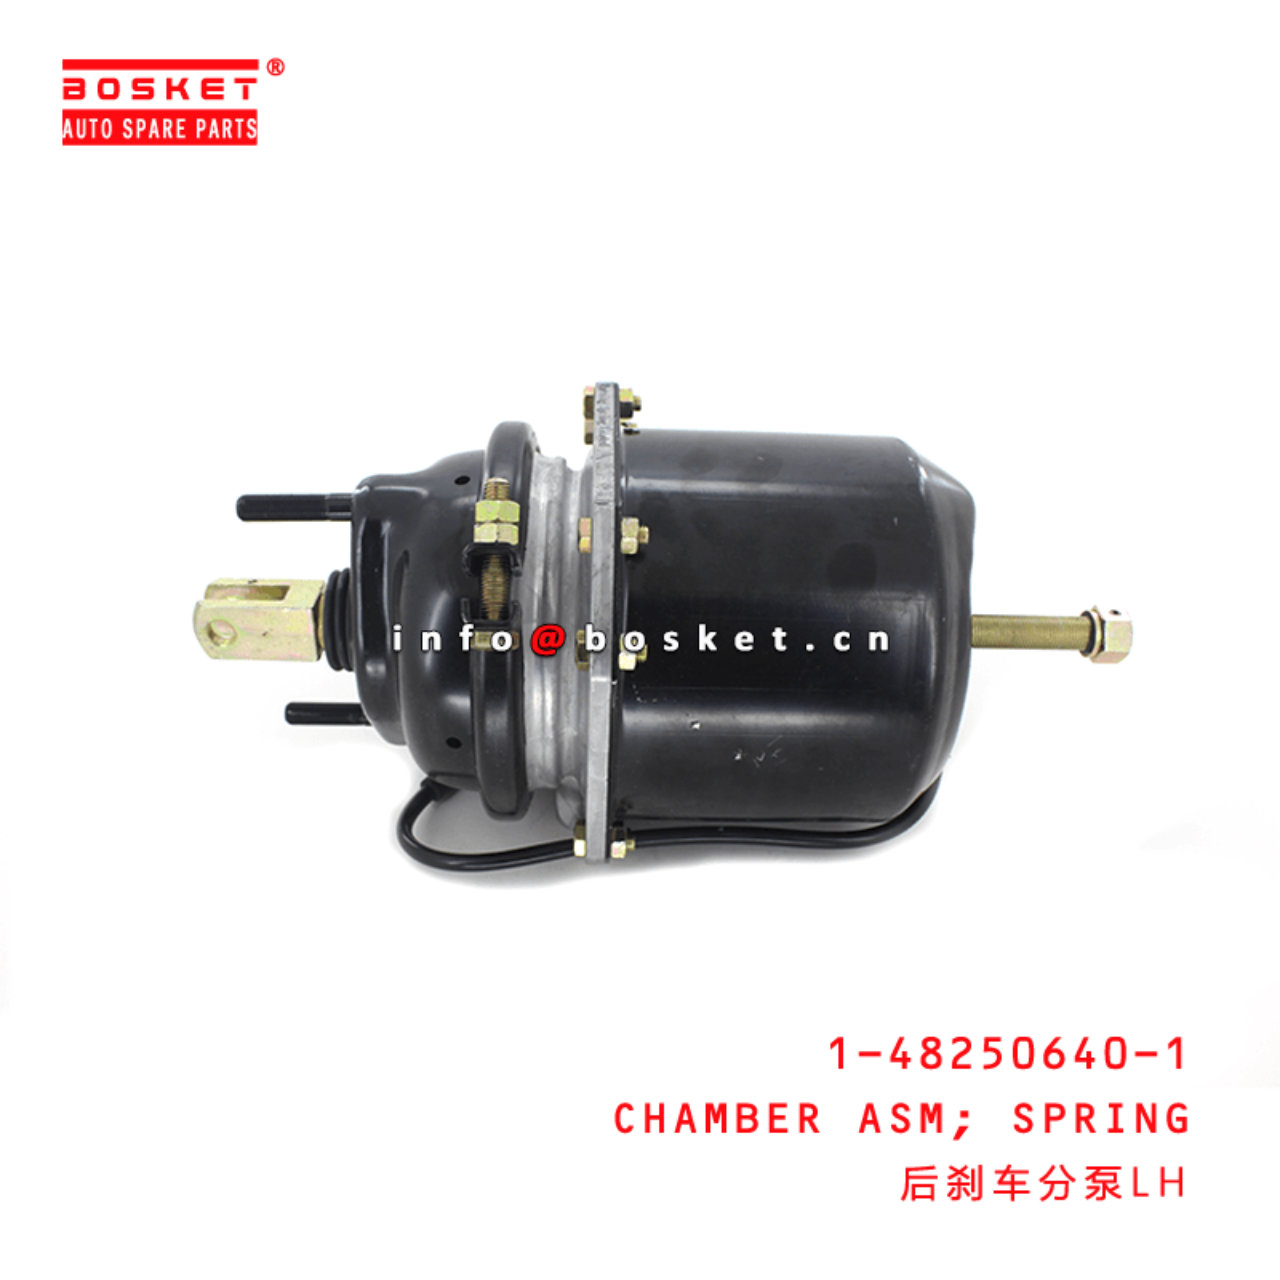 1-48250640-1 Spring Chamber Assembly LH 1482506401 Suitable for ISUZU FVR34 VC46 6HK1